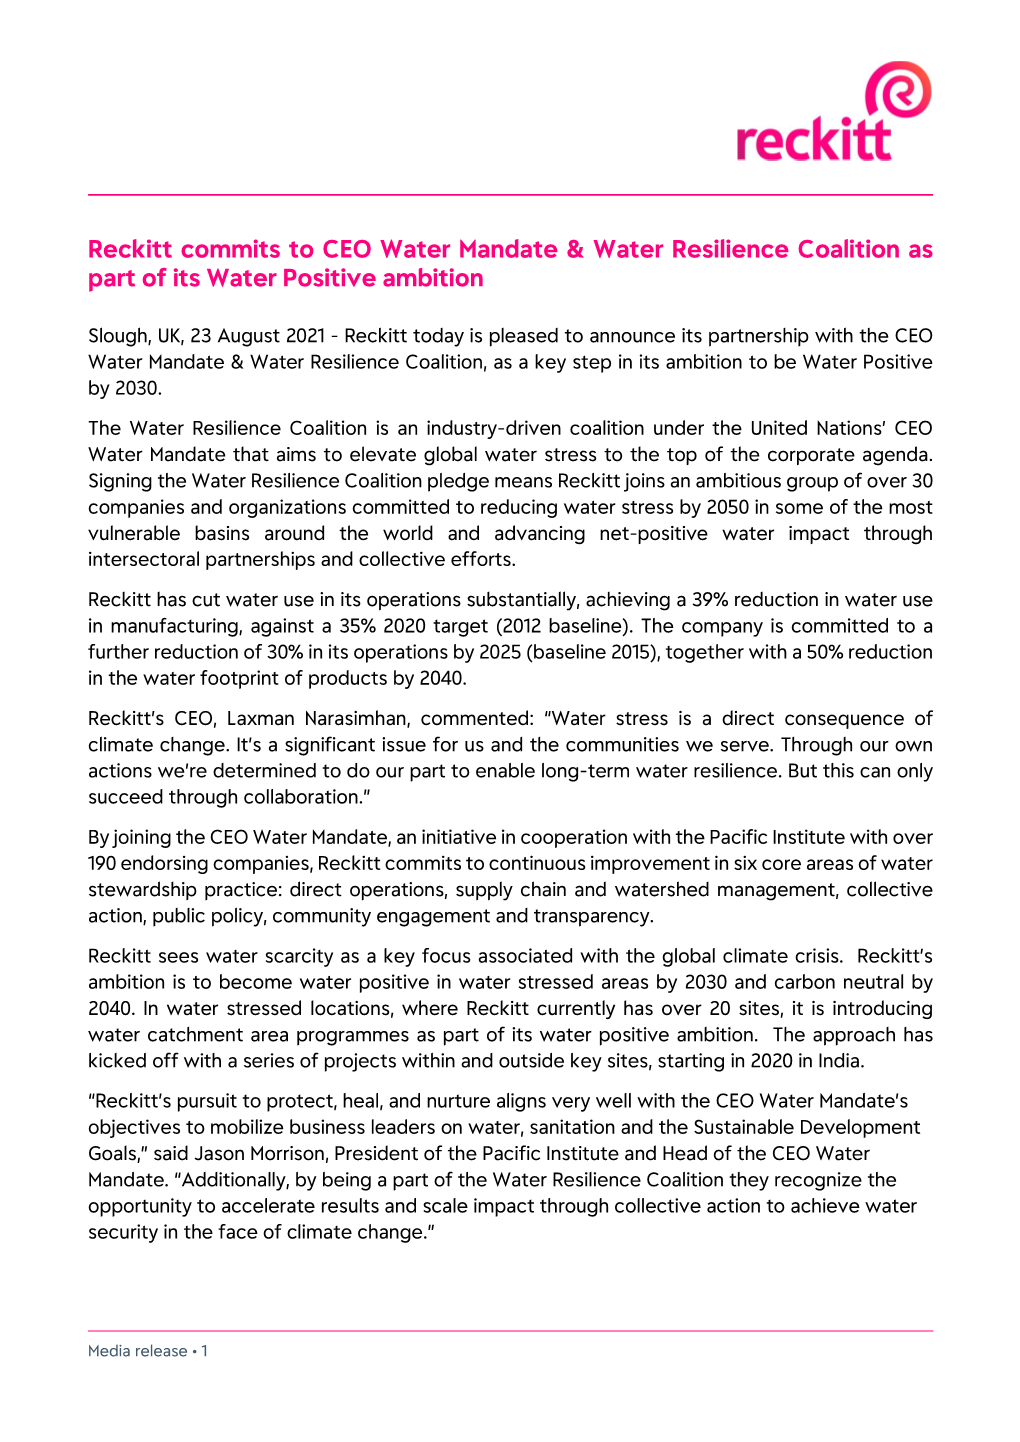 Reckitt Commits to CEO Water Mandate & Water Resilience